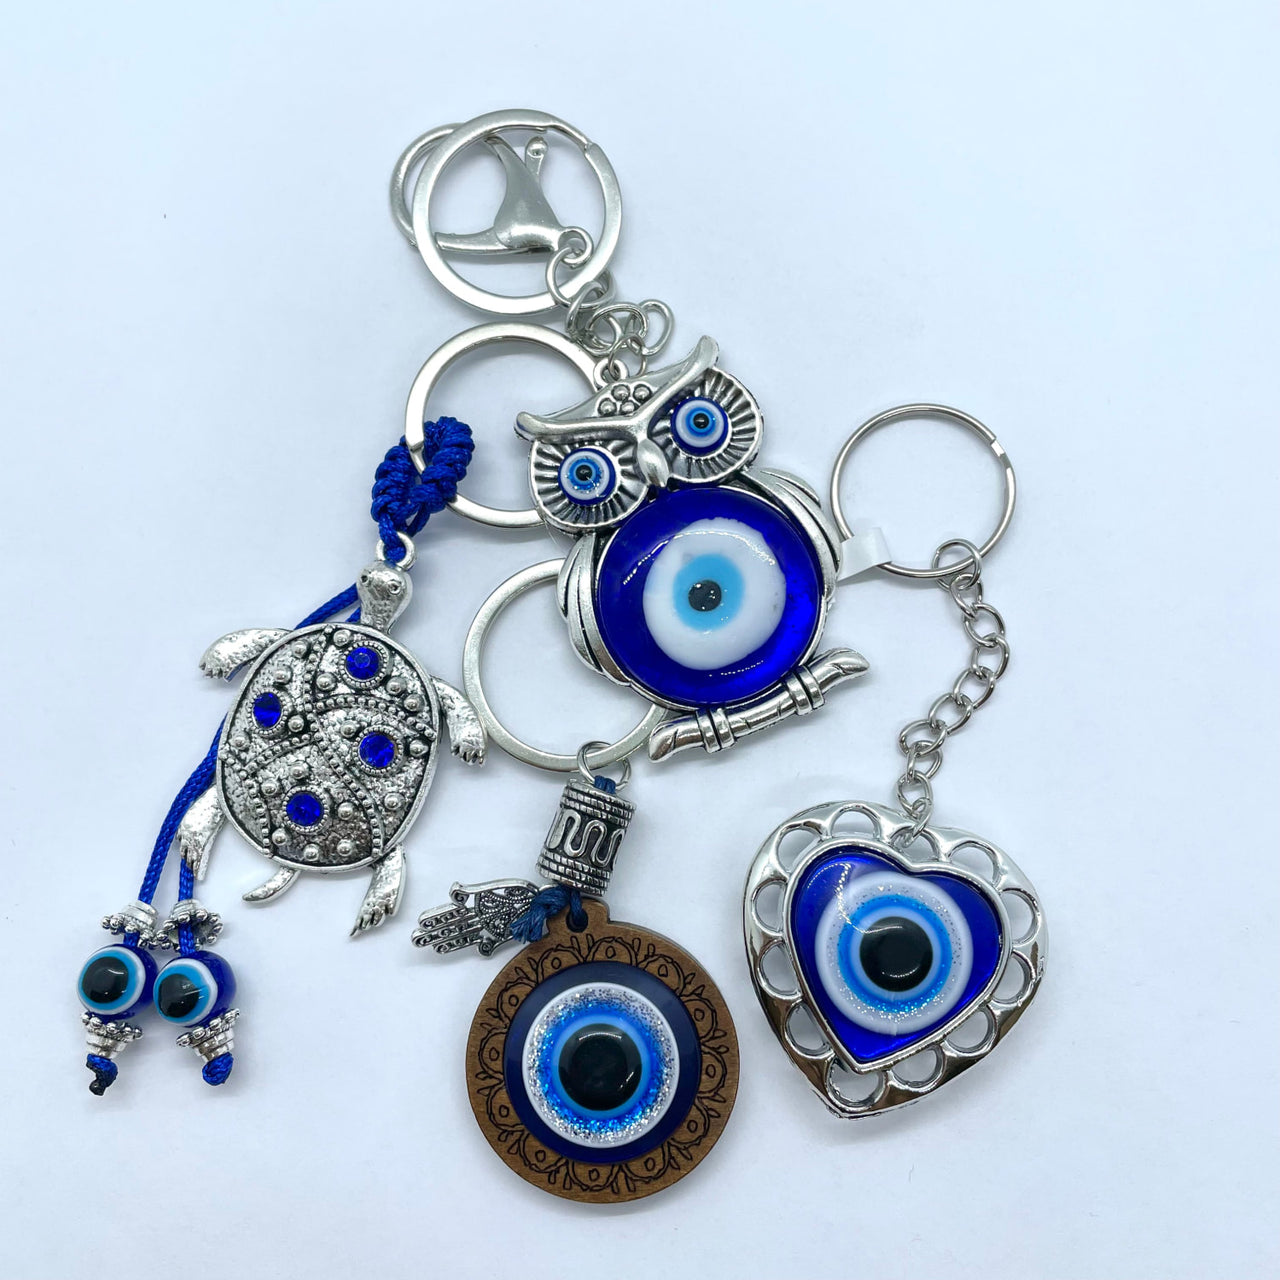 Evil Eye Keychain #Q198 - Blue evil eye and silver keychain charm for protection